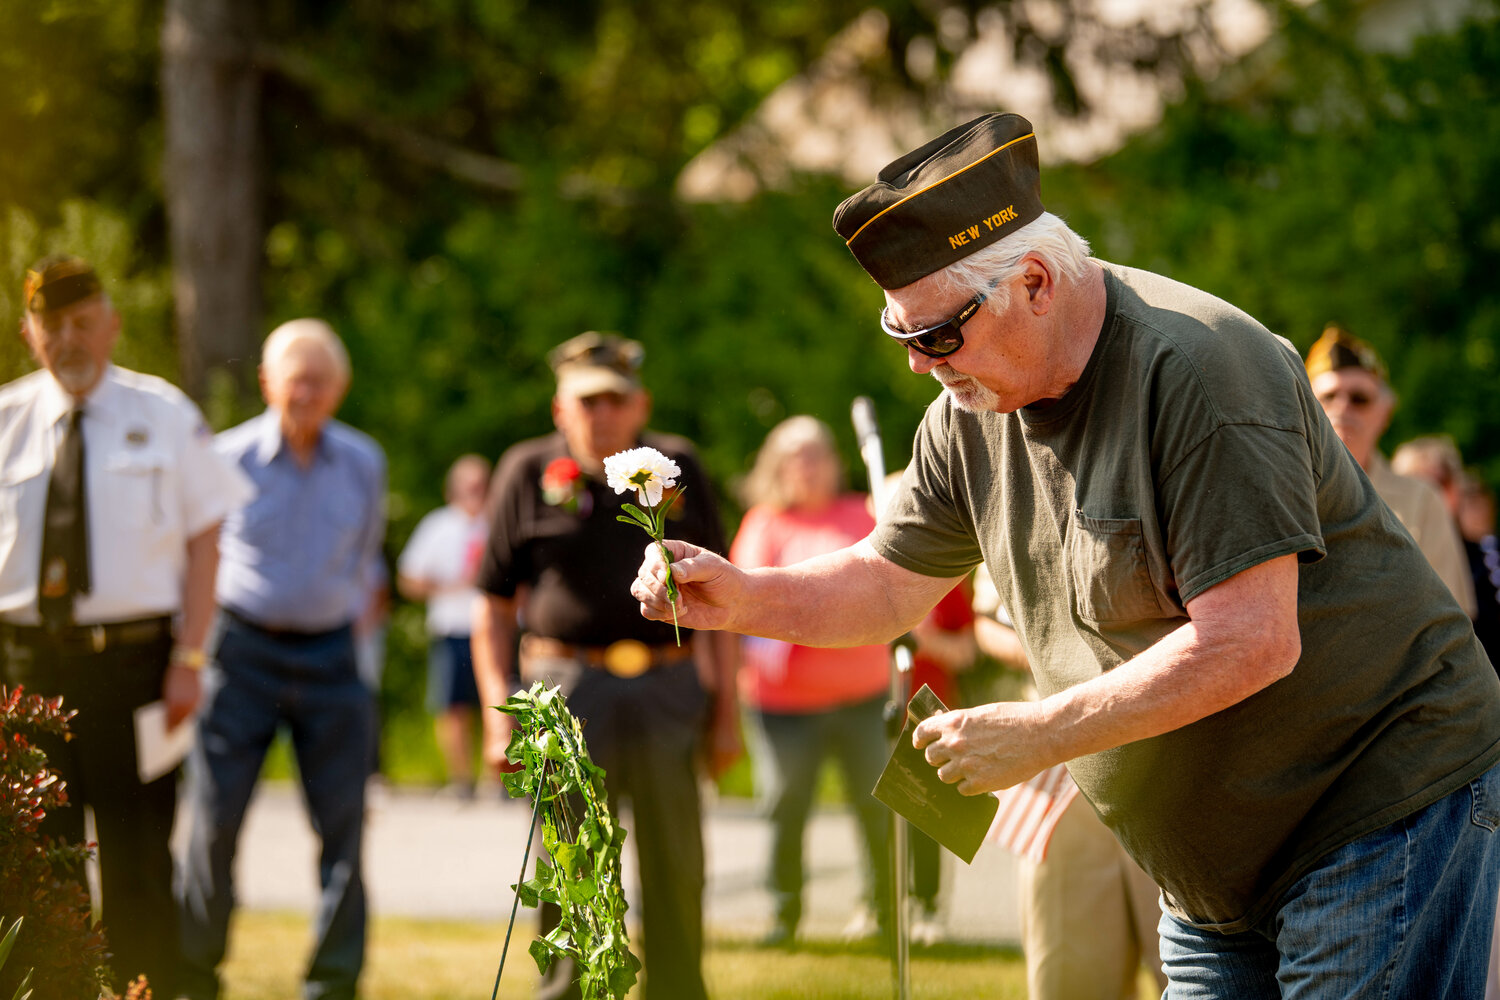 Vietnam veteran Mike Ristics of Damascus, PA, places a flower on the memorial wreath in memory of his fallen comrades.